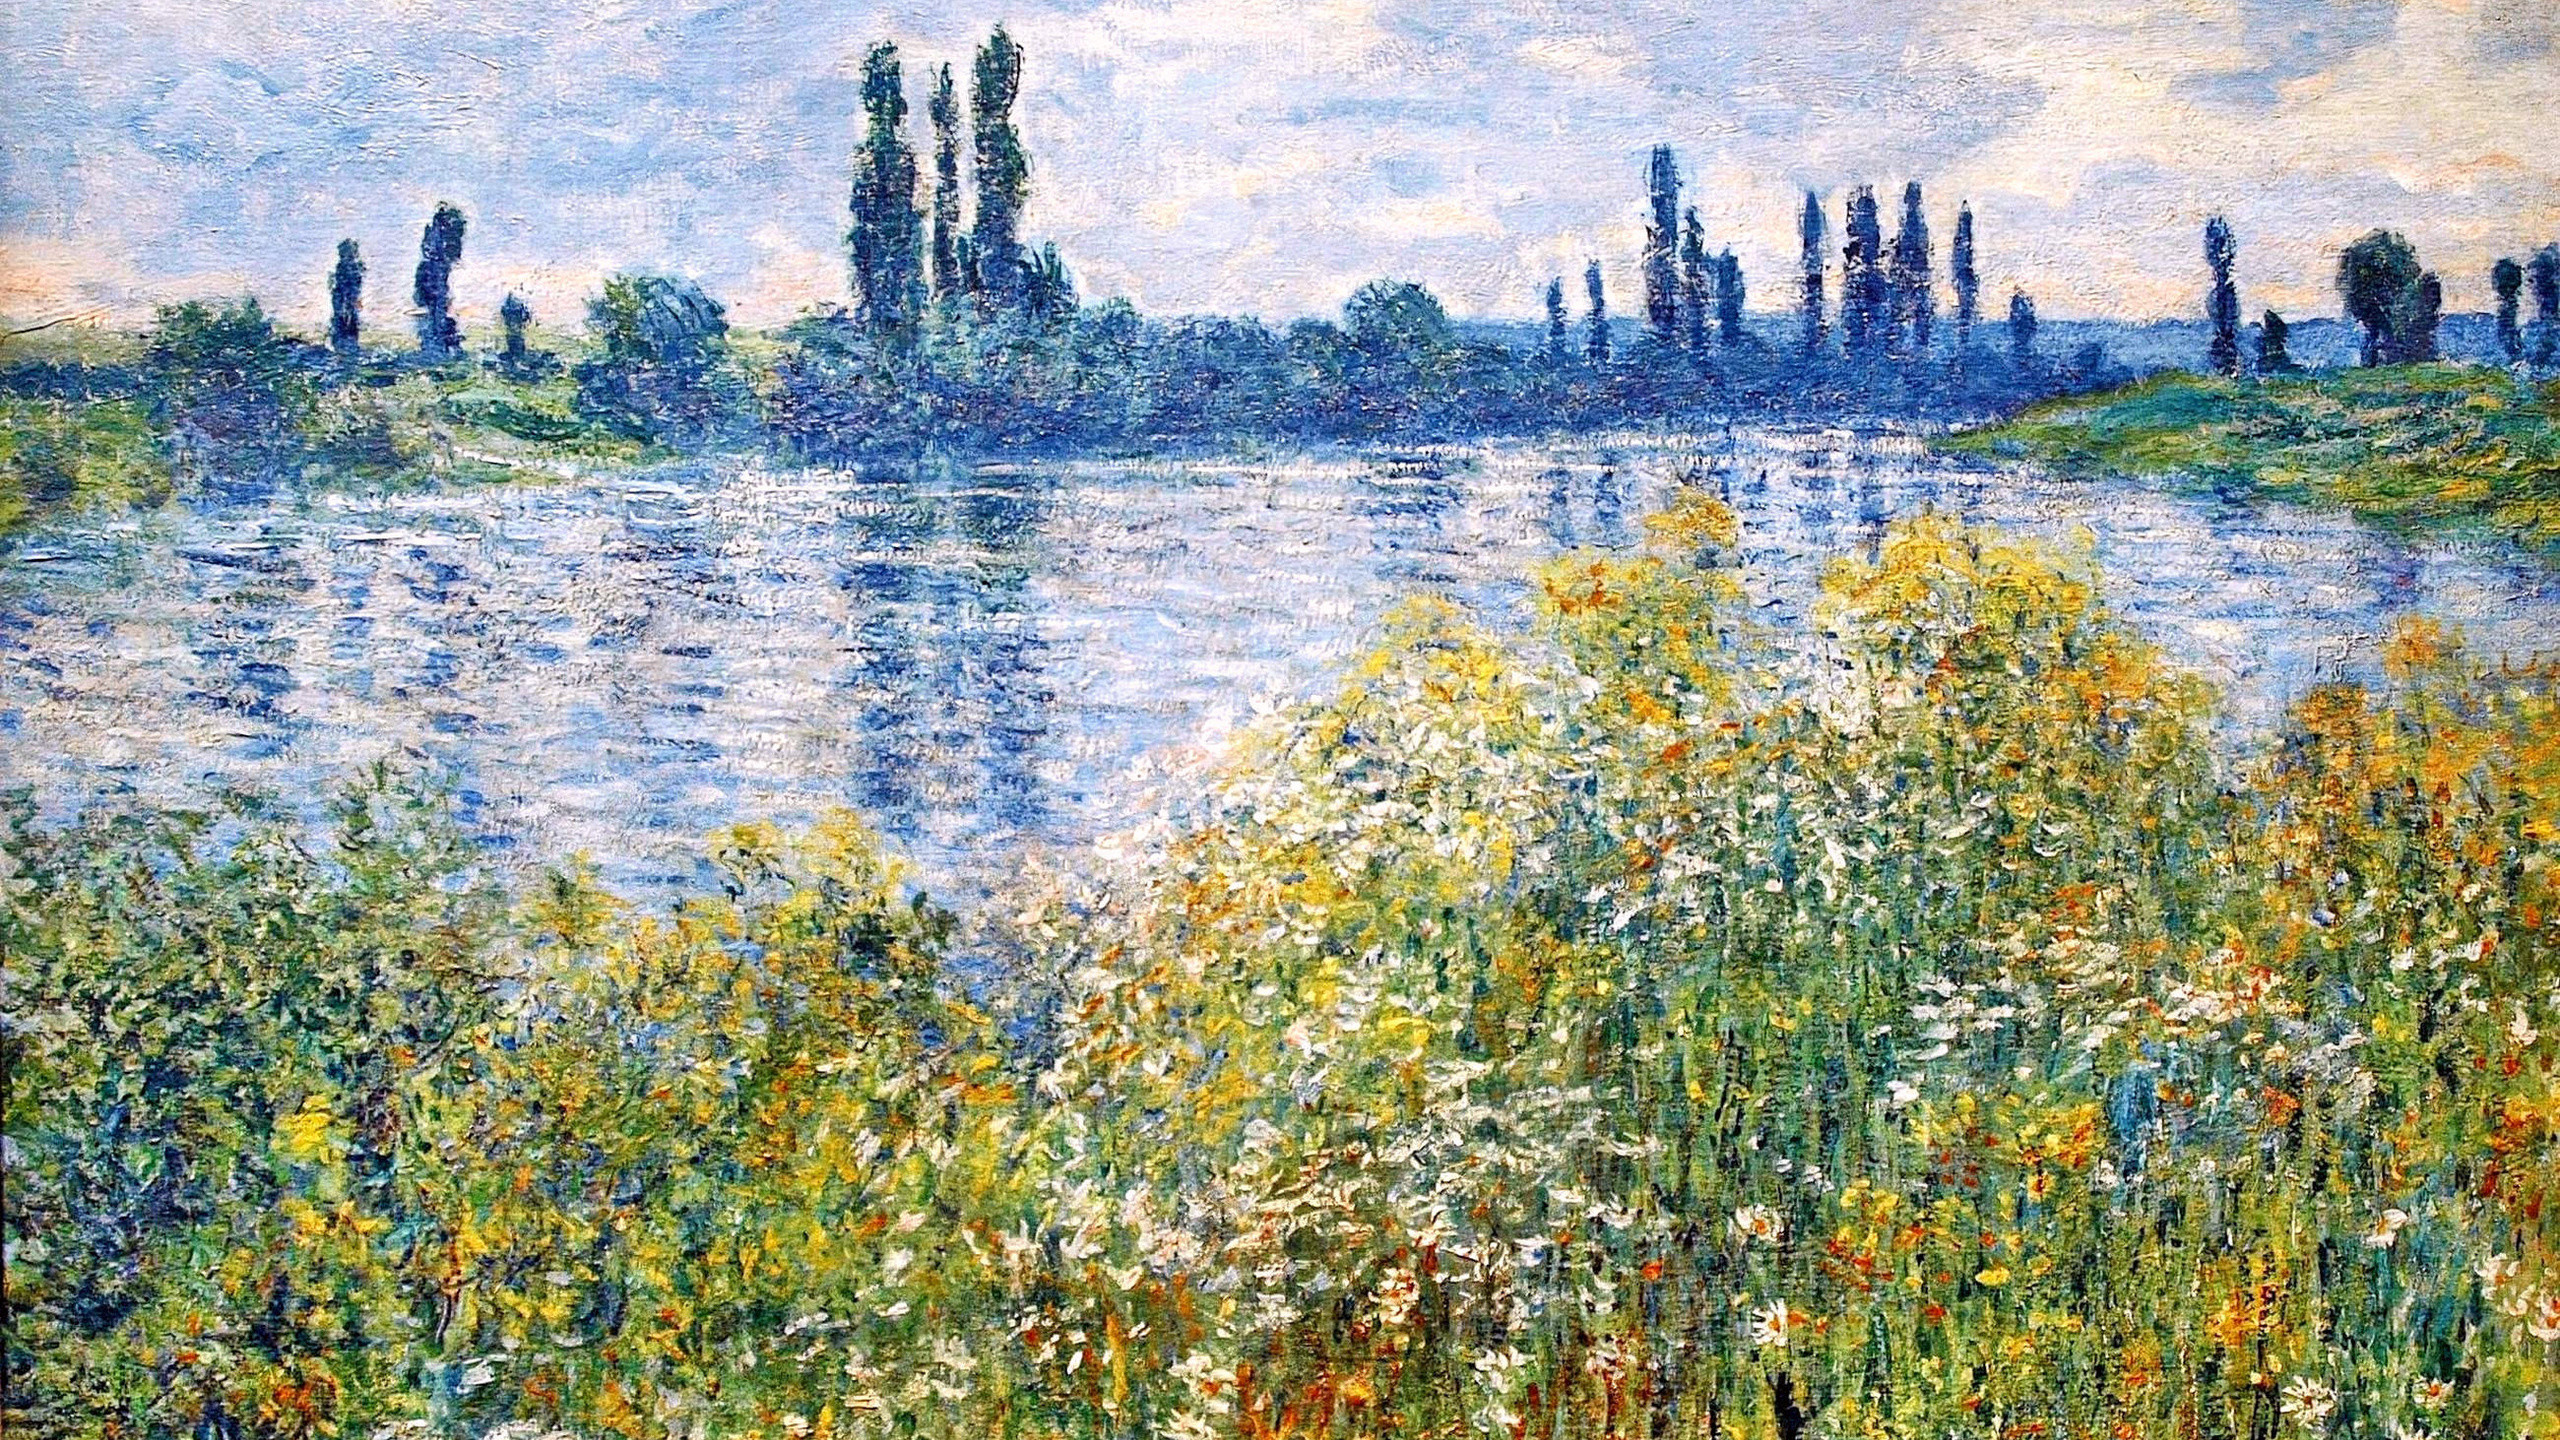 2560x1440 French Paintings, Claudemonetworks, Monet Art, Arts, Claude Monet Works,  Claude Monet